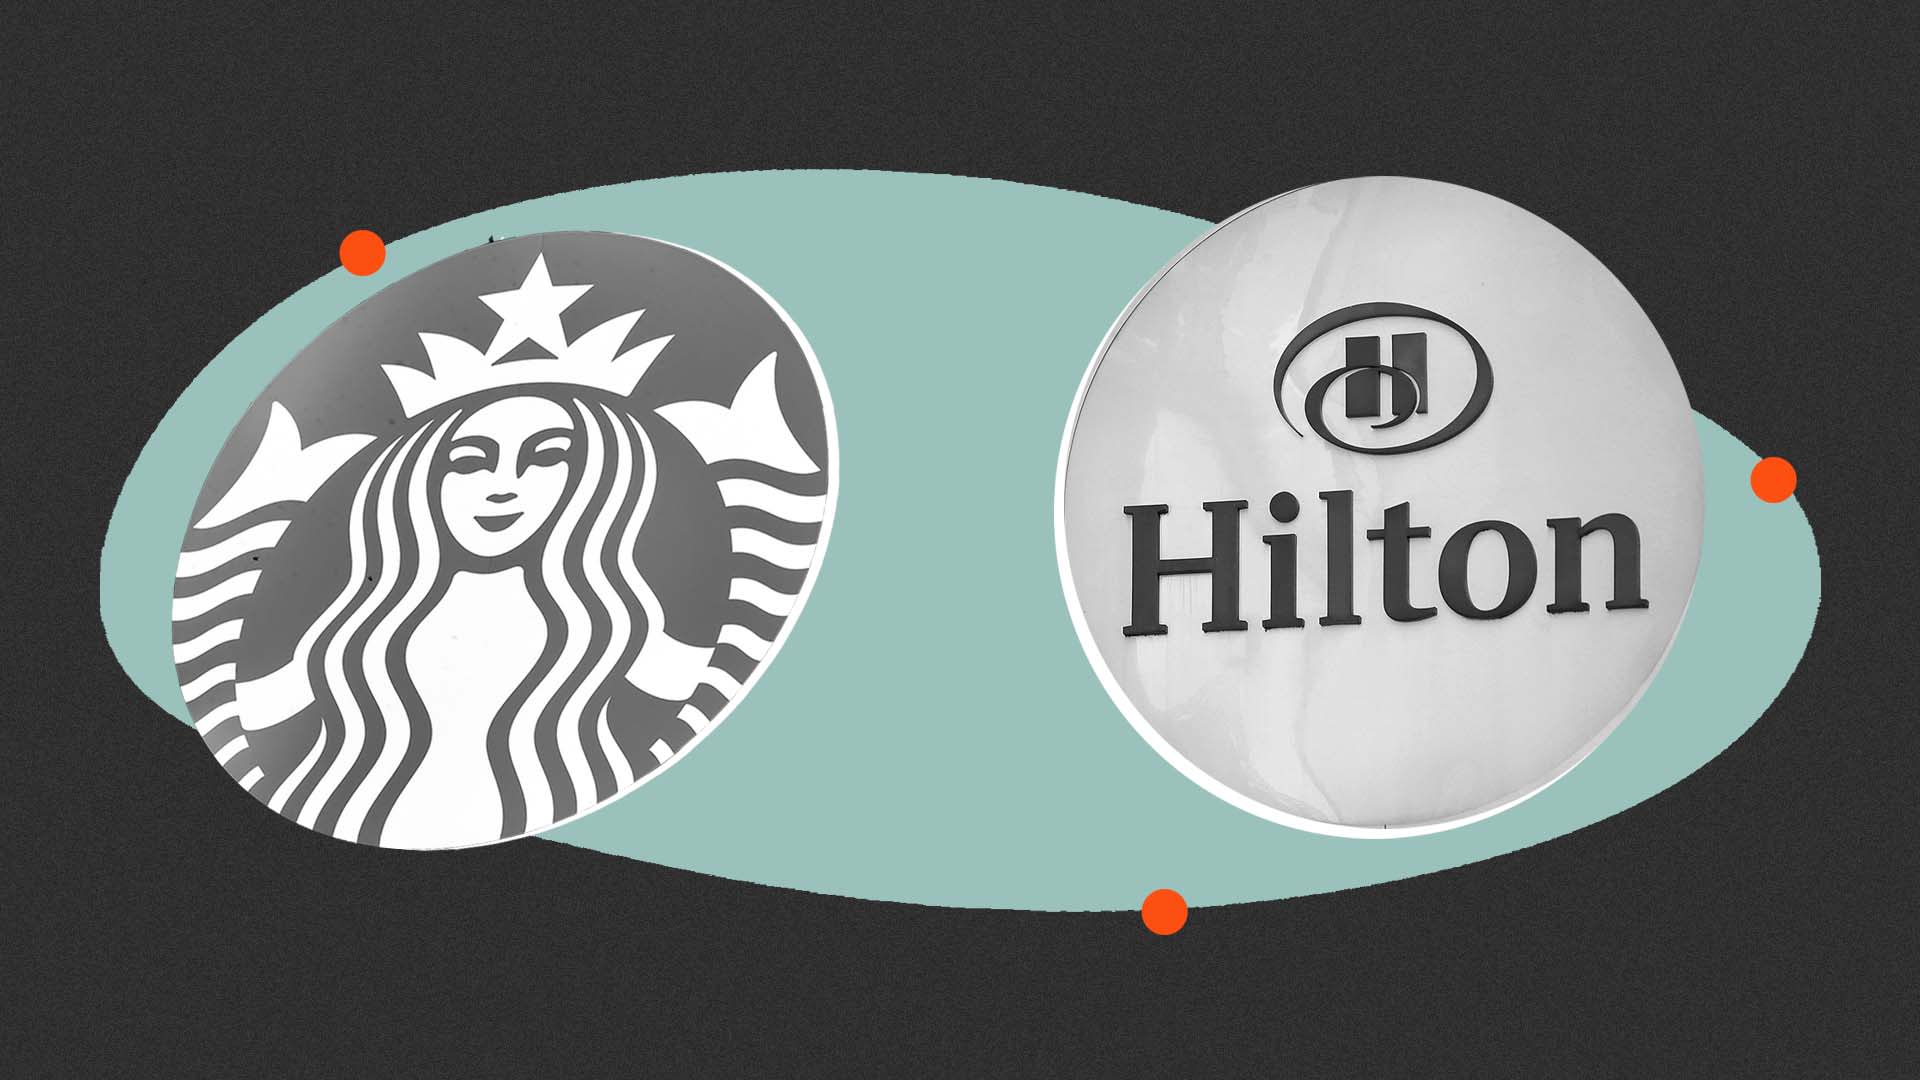 Starbucks and Hilton on How to Use Data as a Secret Weapon